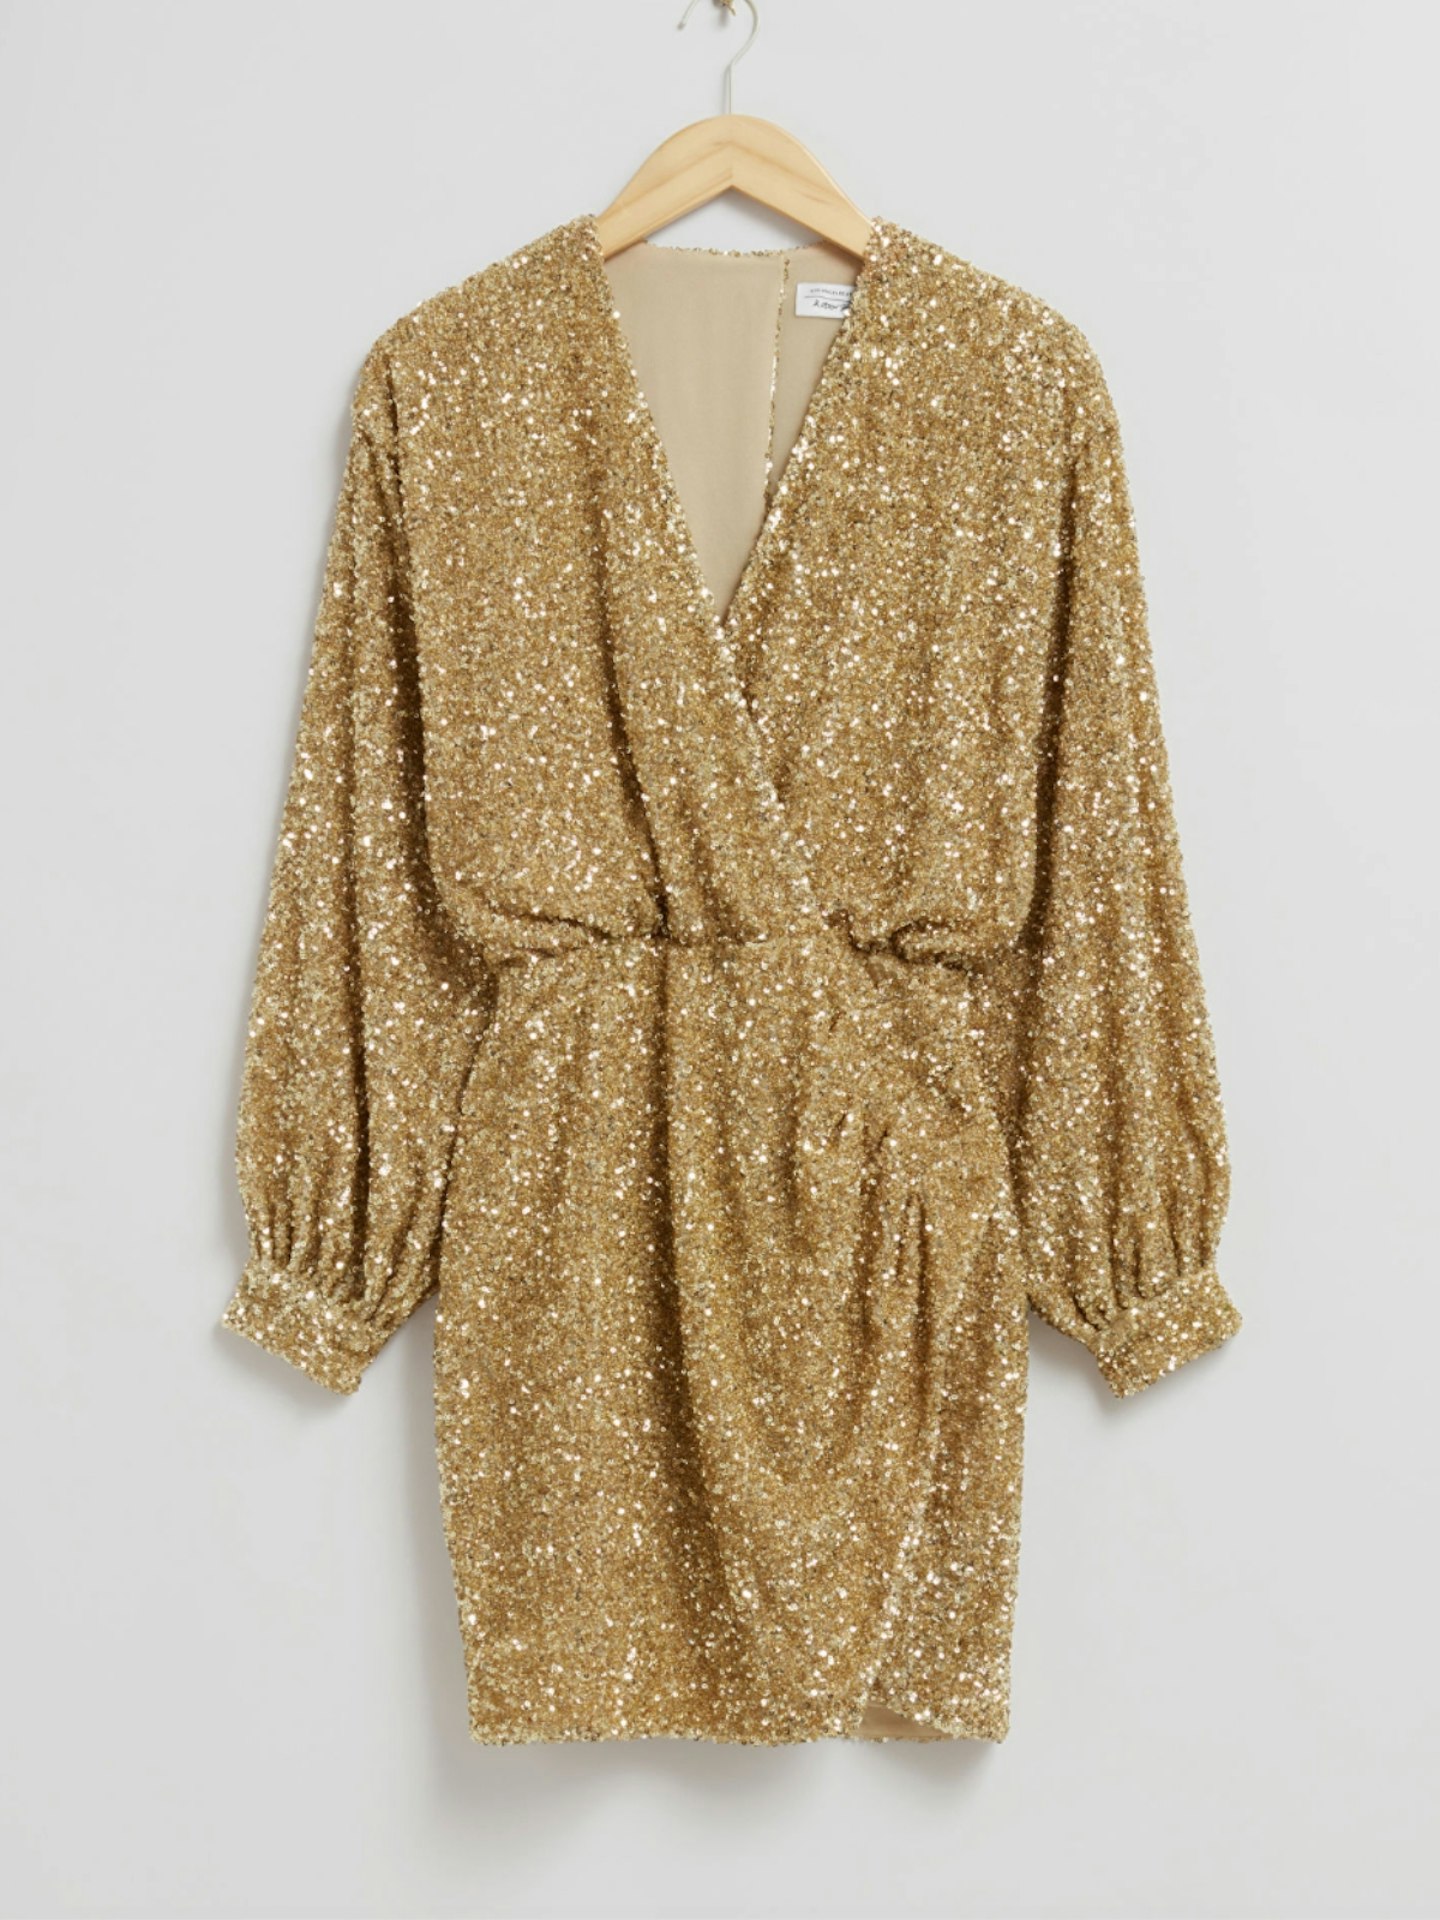 & Other Stories, Wrap-Effect Sequin Mini Dress